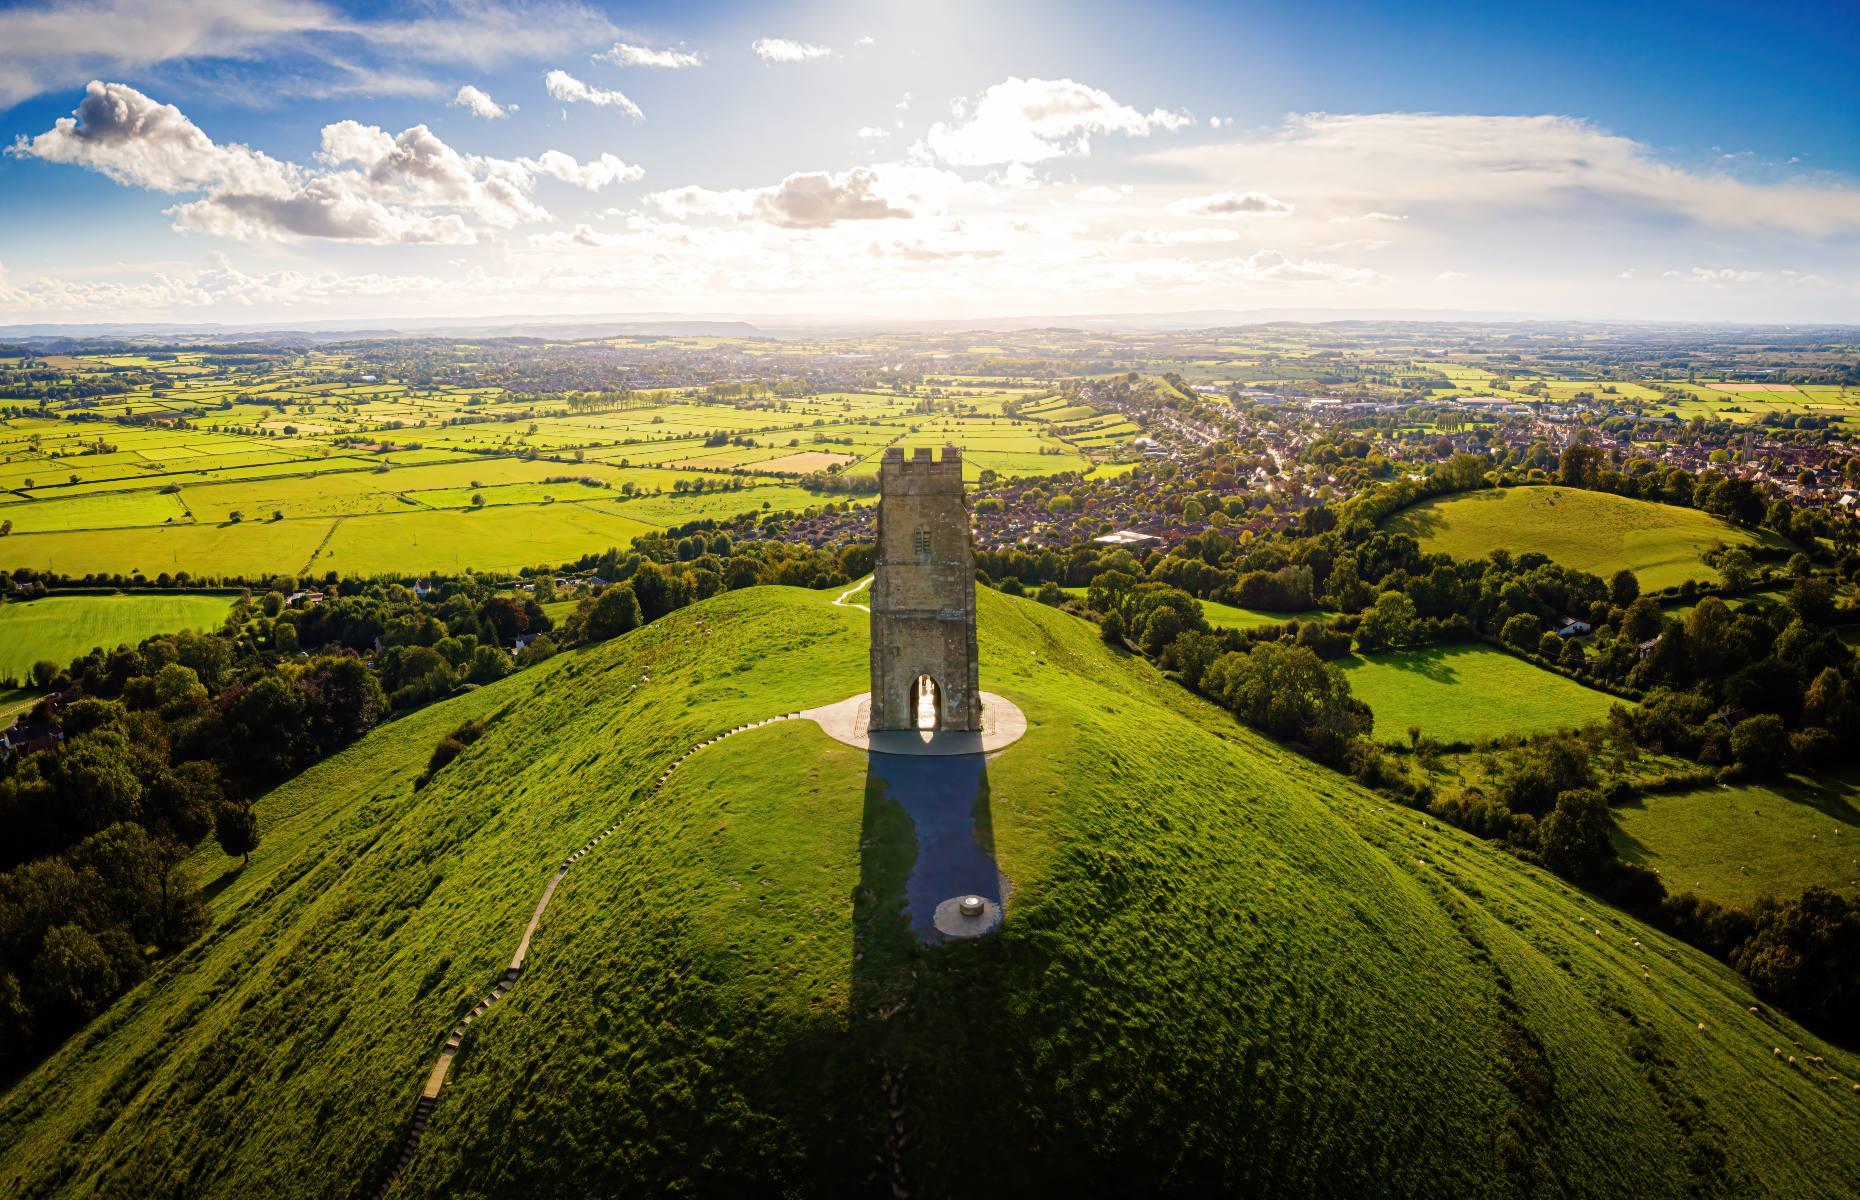 <p>Tangled in pagan history and myth, beautiful <a href="https://www.nationaltrust.org.uk/glastonbury-tor">Glastonbury Tor</a> has been one of England’s most important spiritual sites for more than 1,000 years. There are many myths and legends associated with the hill, including that the Holy Grail – brought here by Jesus’ uncle Joseph Arimathea – is buried in a cave below. Perched at the top are the ruins of the 14th-century St Michael’s Tower, which offers incredible views across the Somerset countryside.</p>